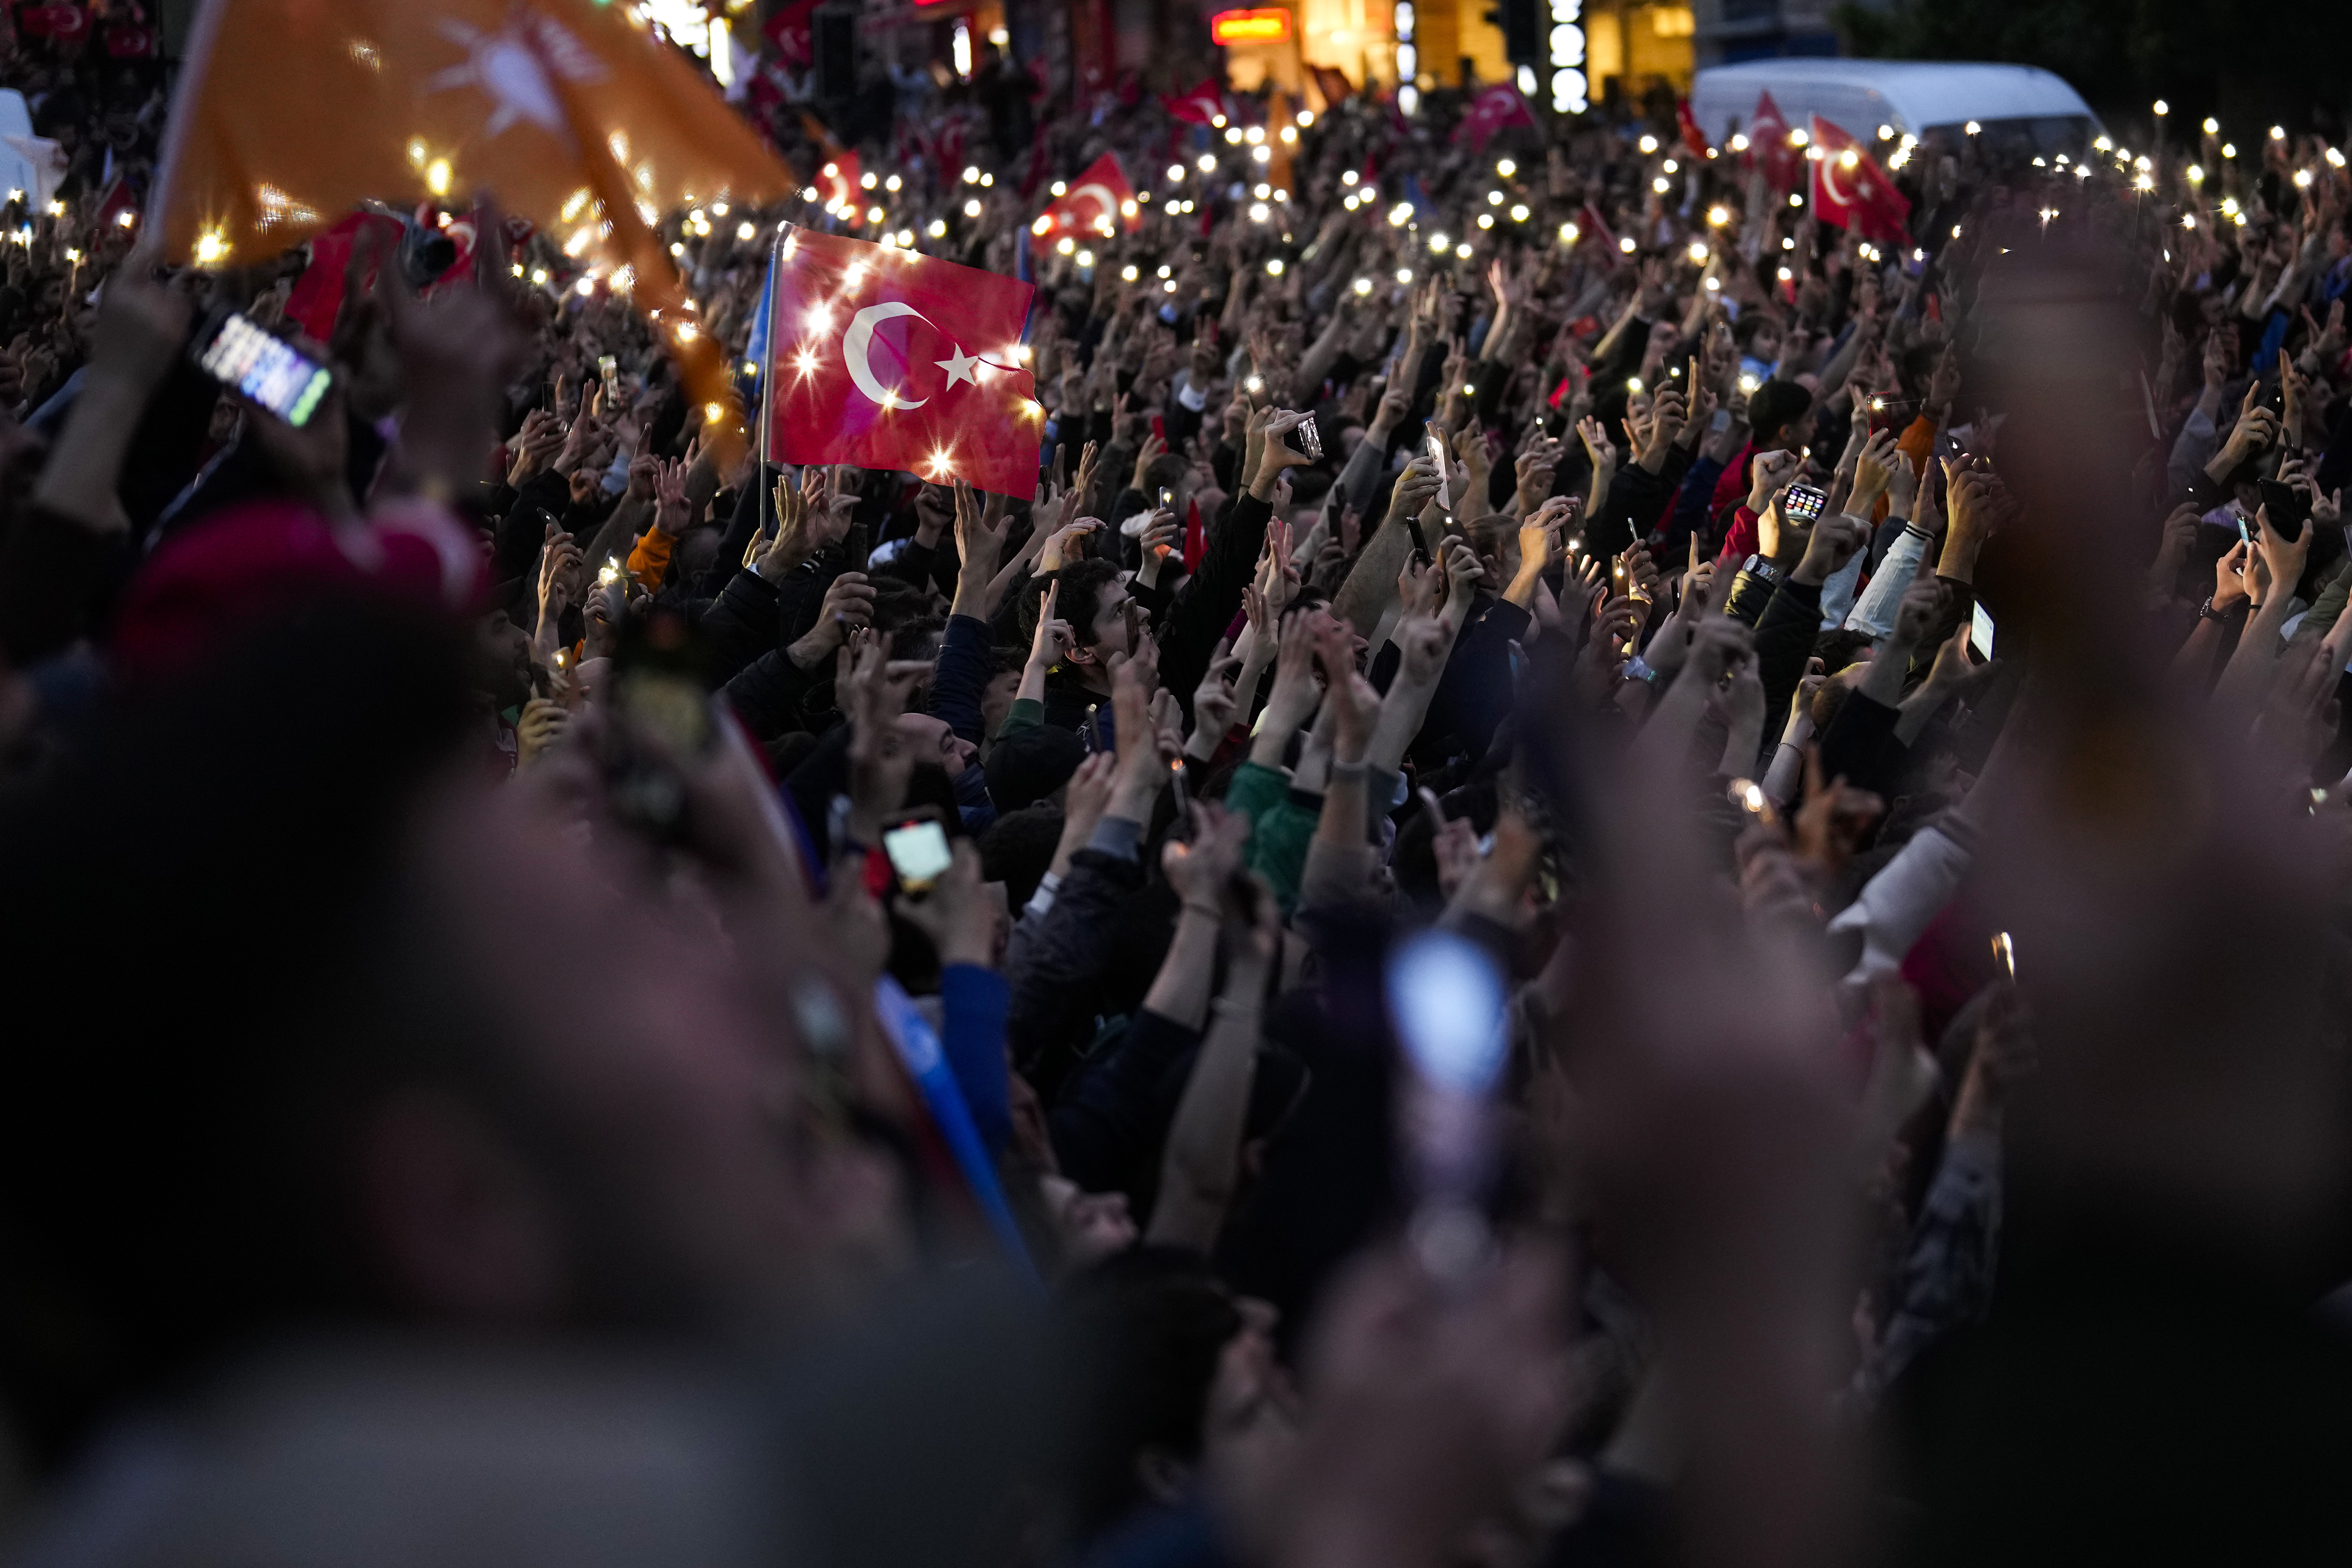 Supporters of President Recep Tayyip Erdogan celebrate outside his residence in Istanbul, Turkey, Sunday, May 28, 2023. Turkey's incumbent President Recep Tayyip Erdogan has declared victory in his country's runoff election, extending his rule into a third decade. (AP Photo/Francisco Seco)


Associated Press/LaPresse
Only Italy and Spain